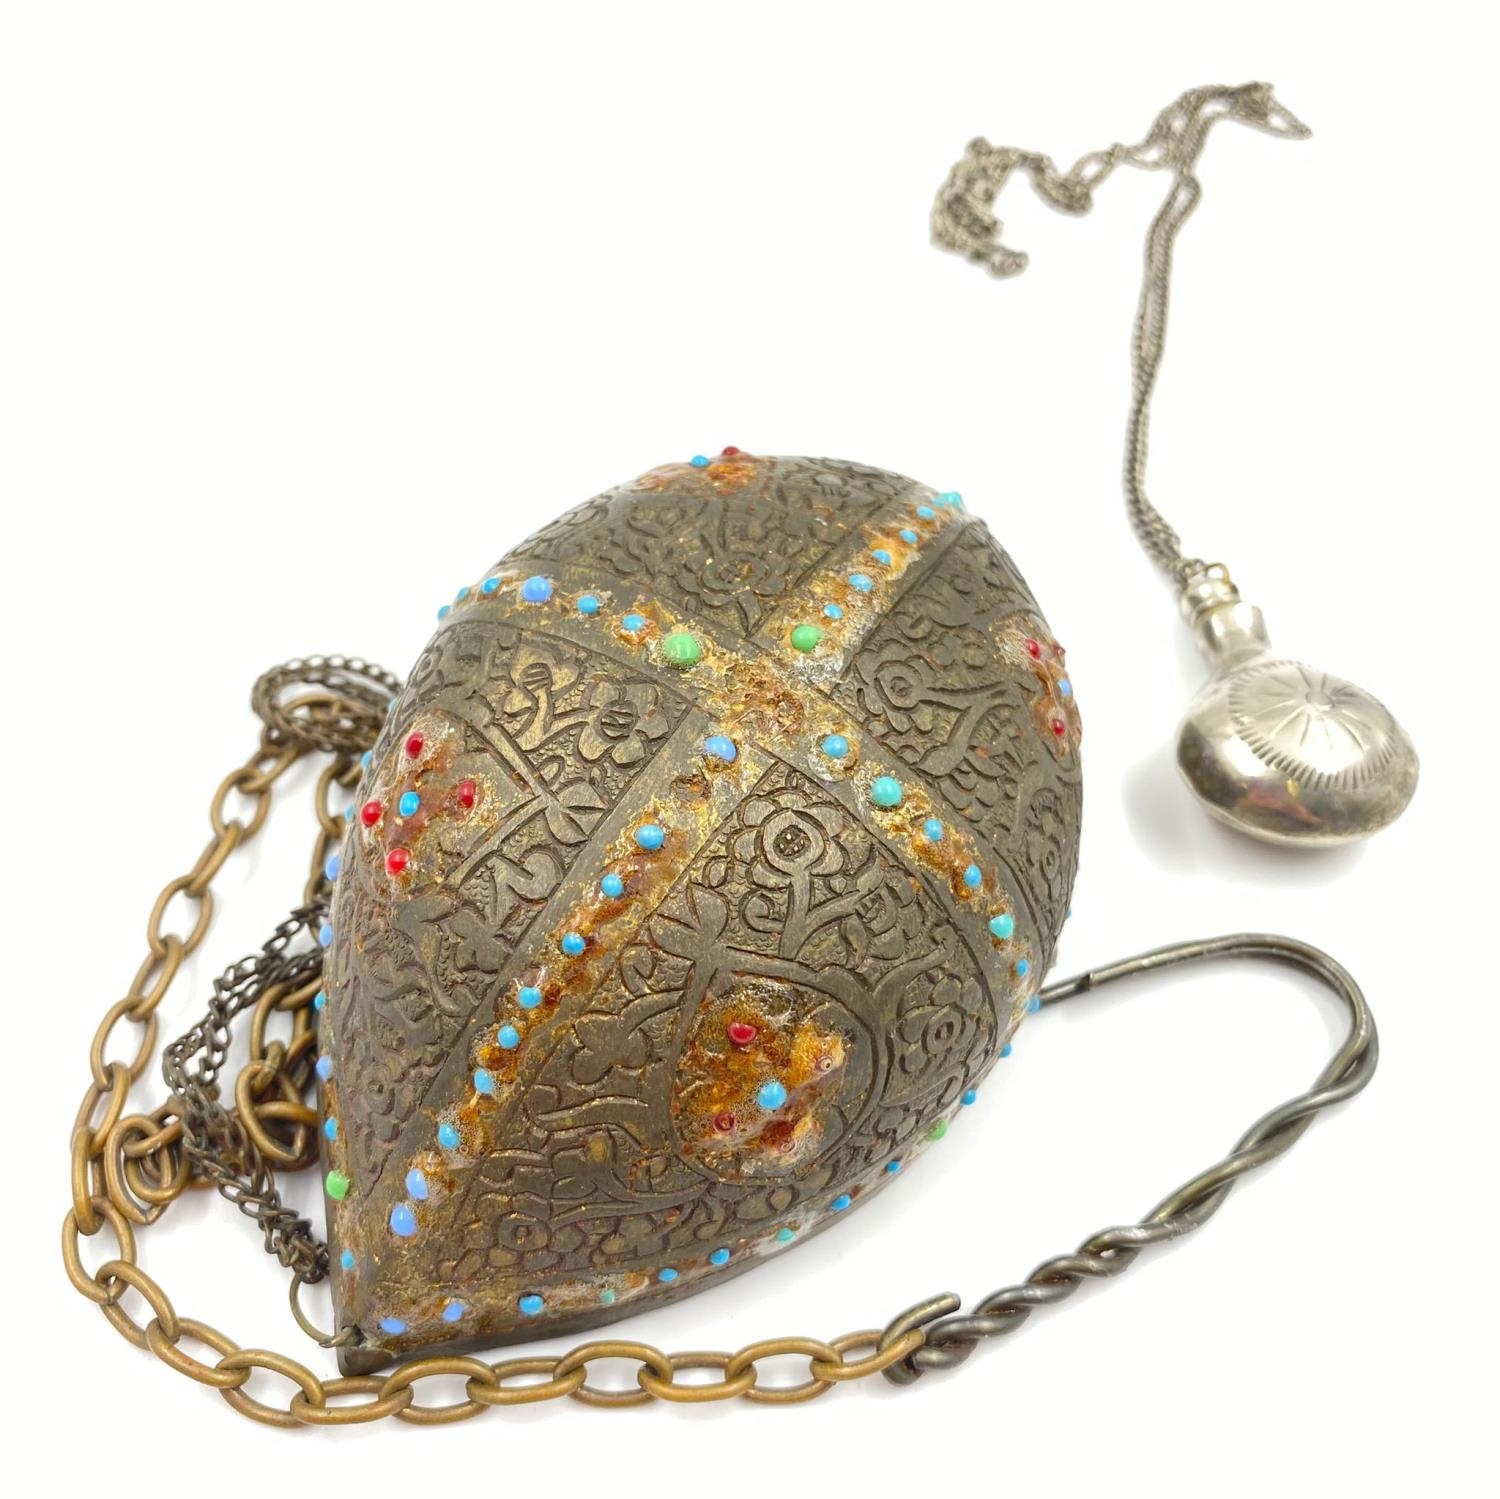 AN ANTIQUE KASHKUL MADE FROM BRASS AND DECORATED WITH TURQUOISE AND OTHER STONE. 13CM X 7.5CM AND